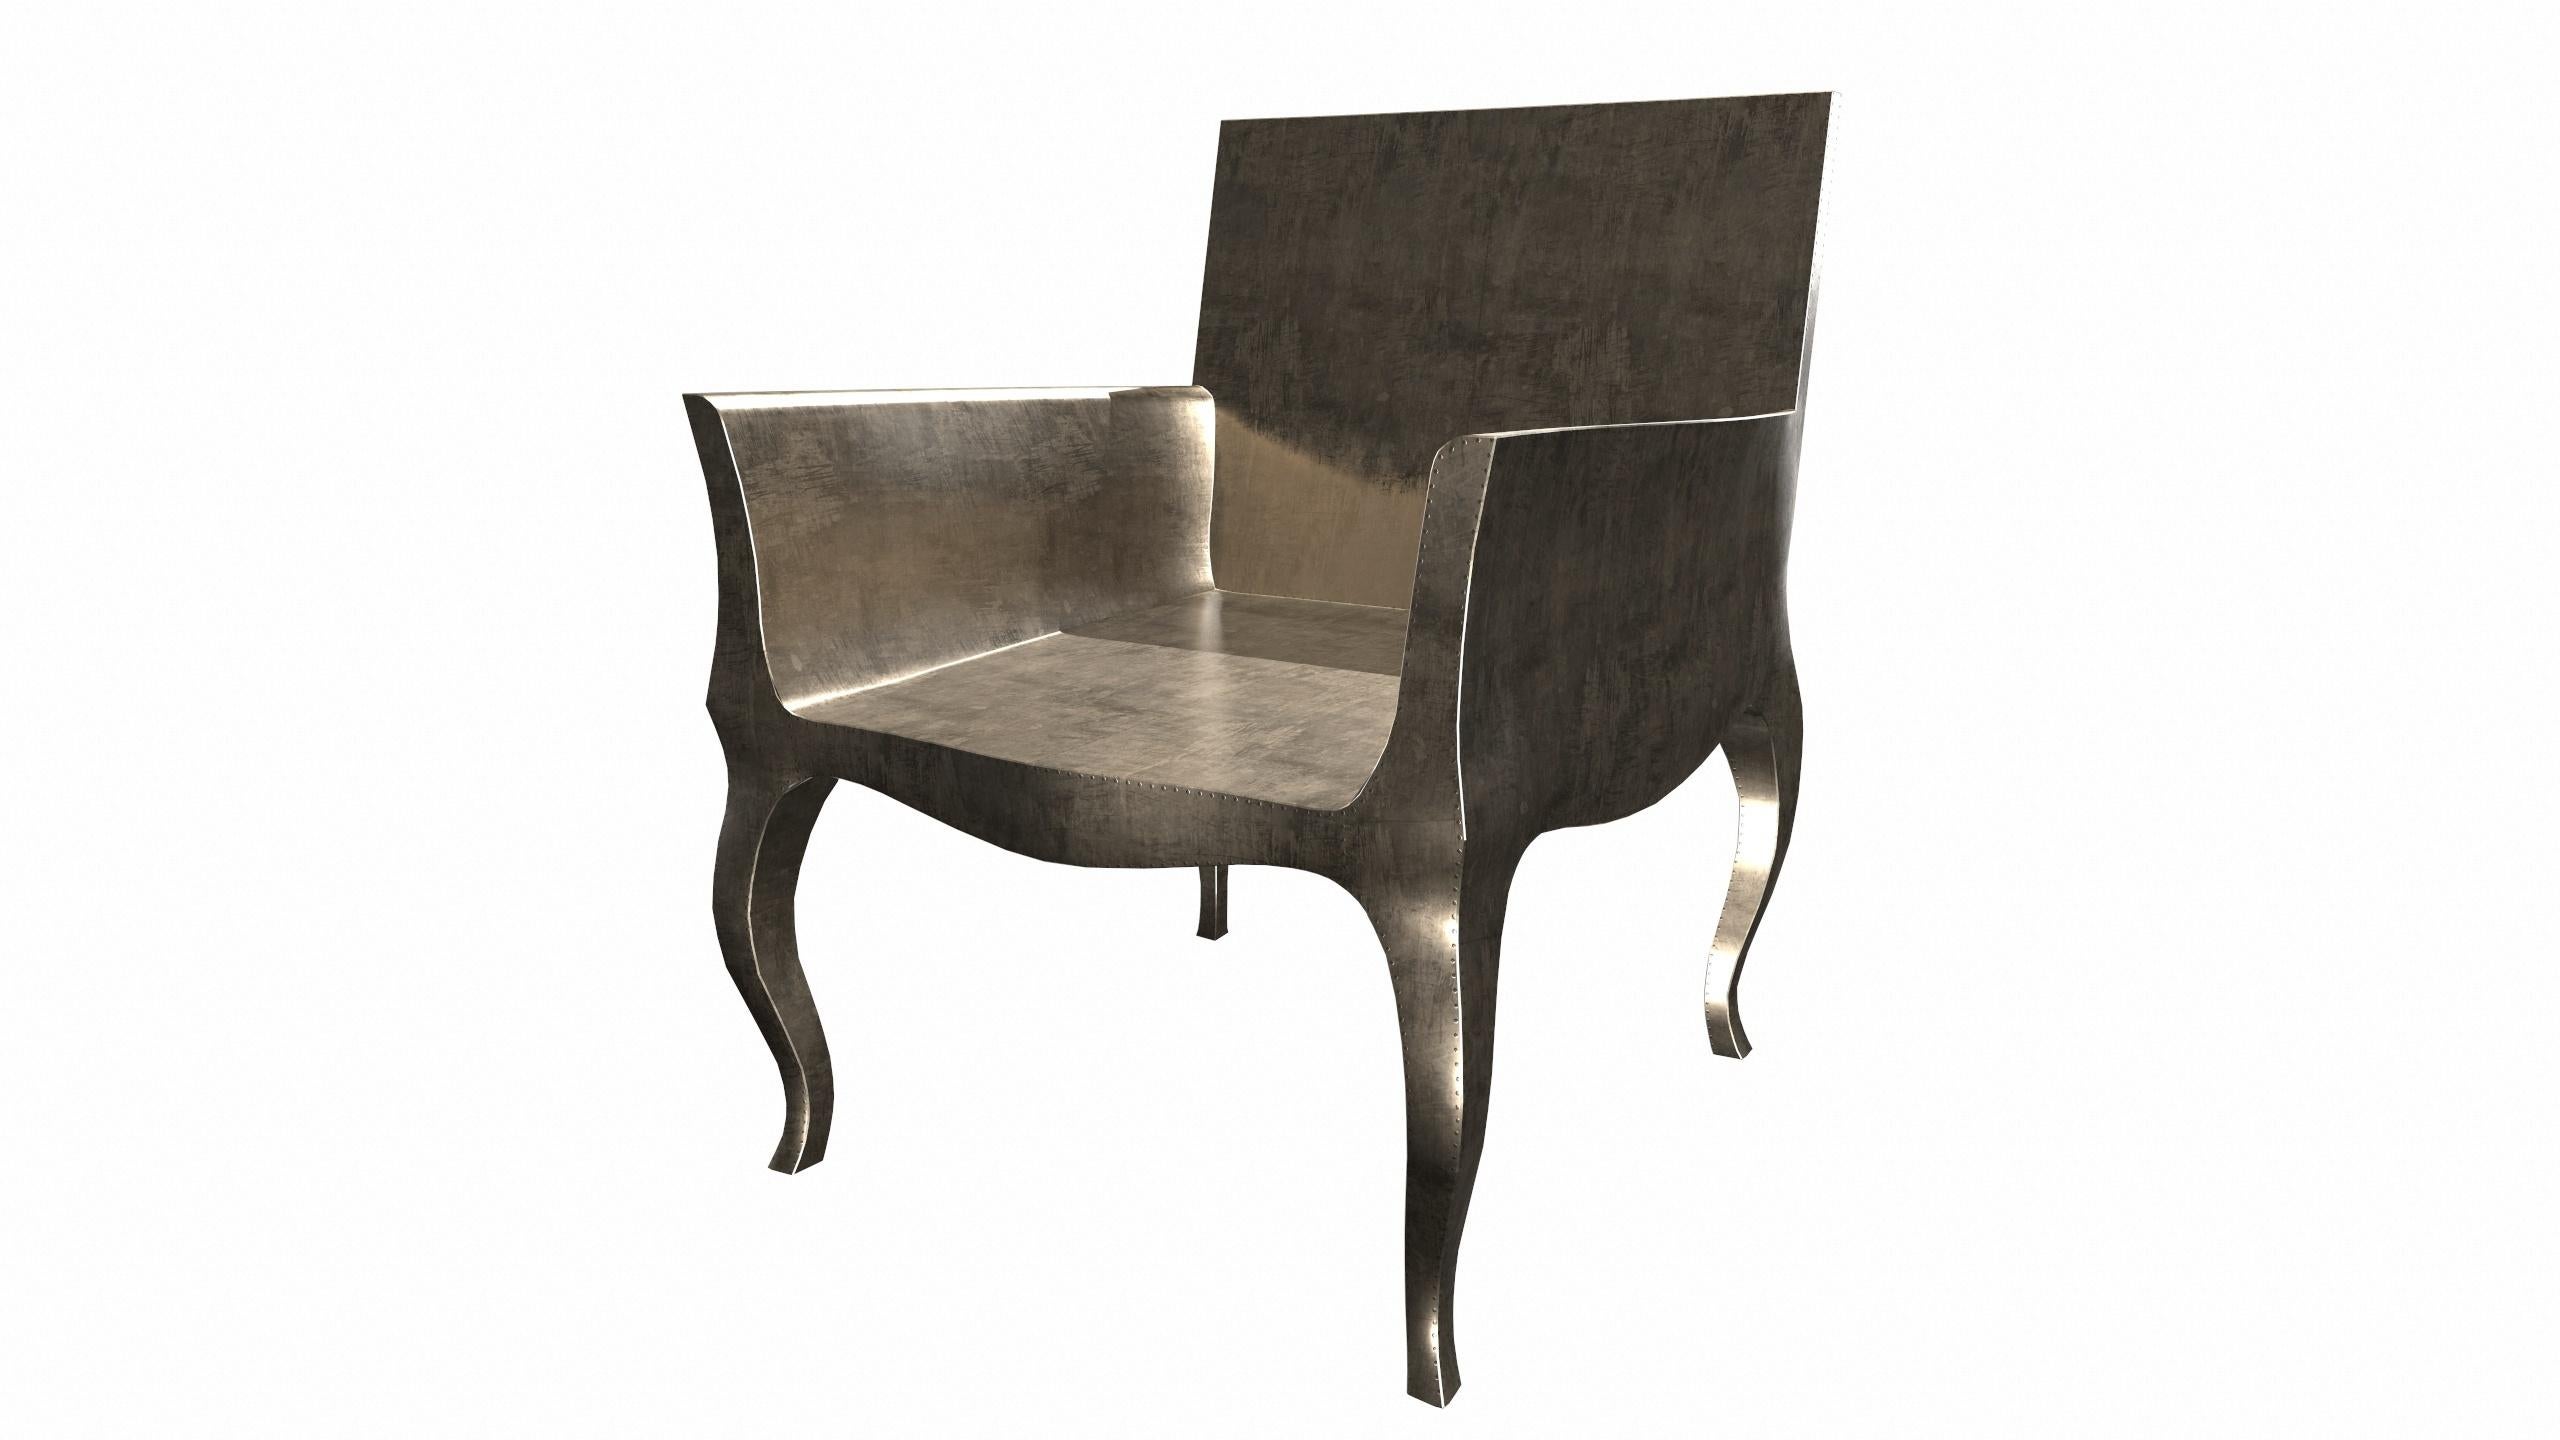 Other Art Deco Chairs in Smooth Antique Bronze by Paul Mathieu for S. Odegard For Sale